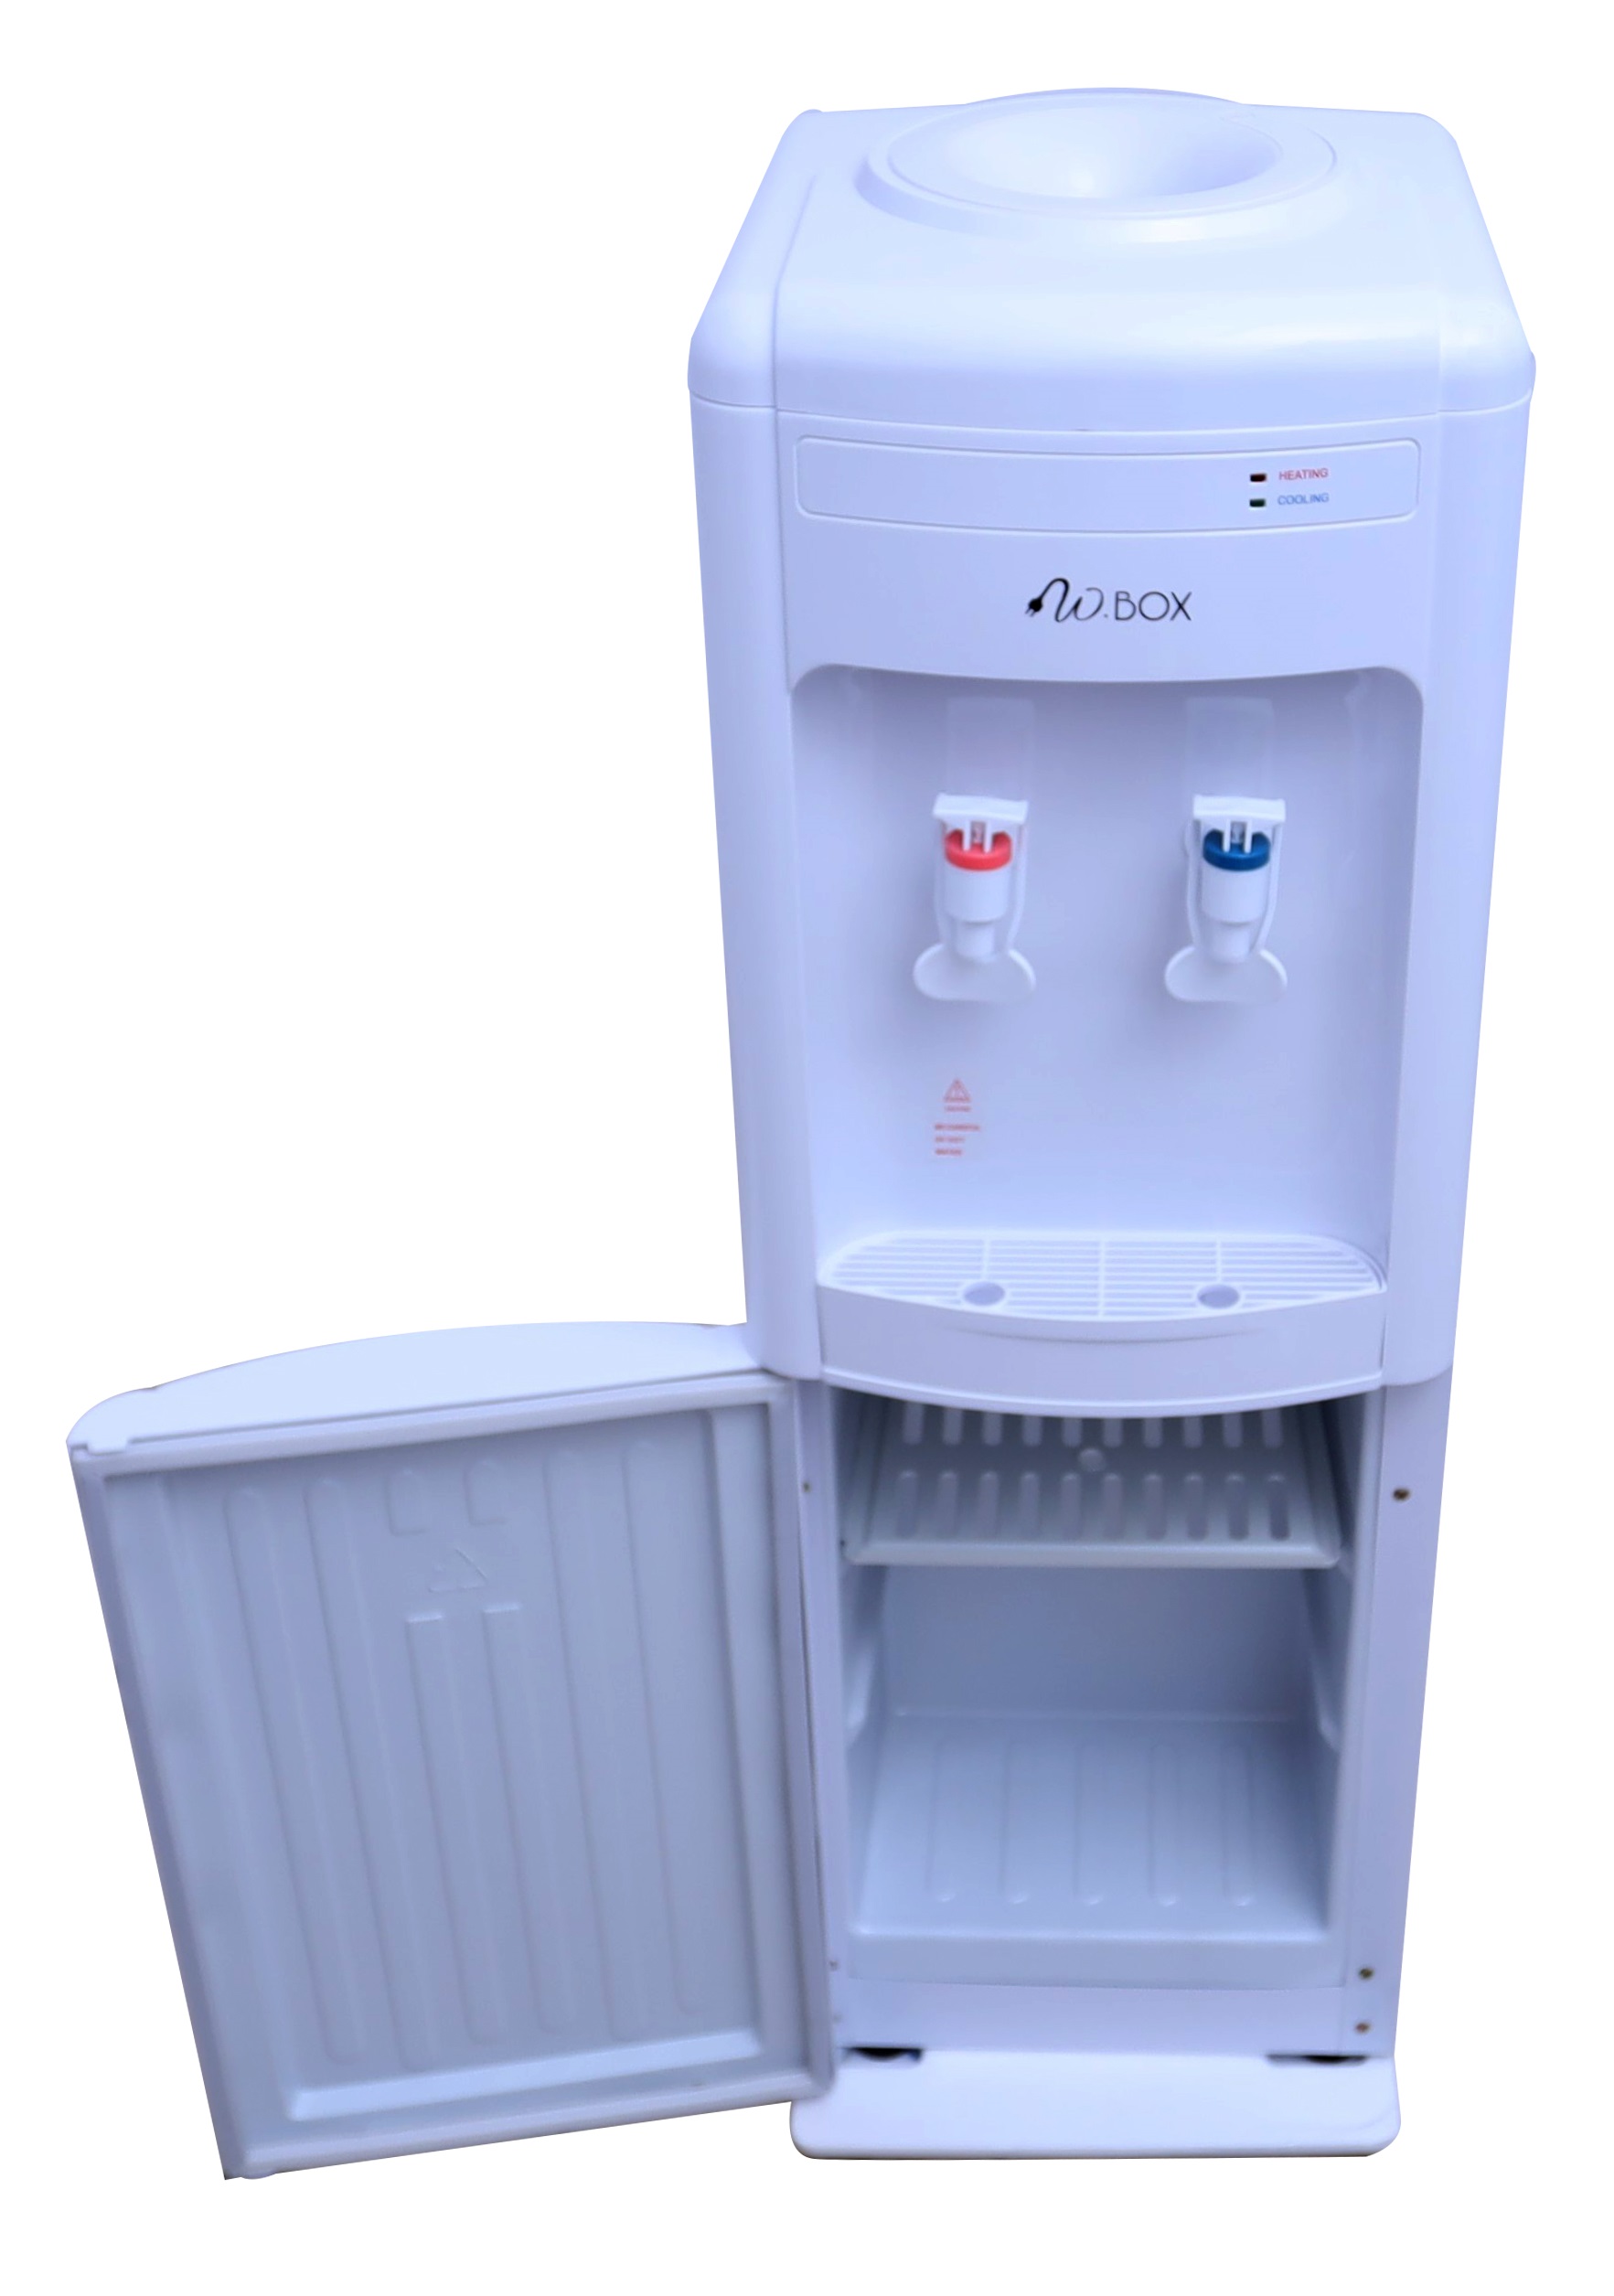 Water cooler from Raco W.BOX